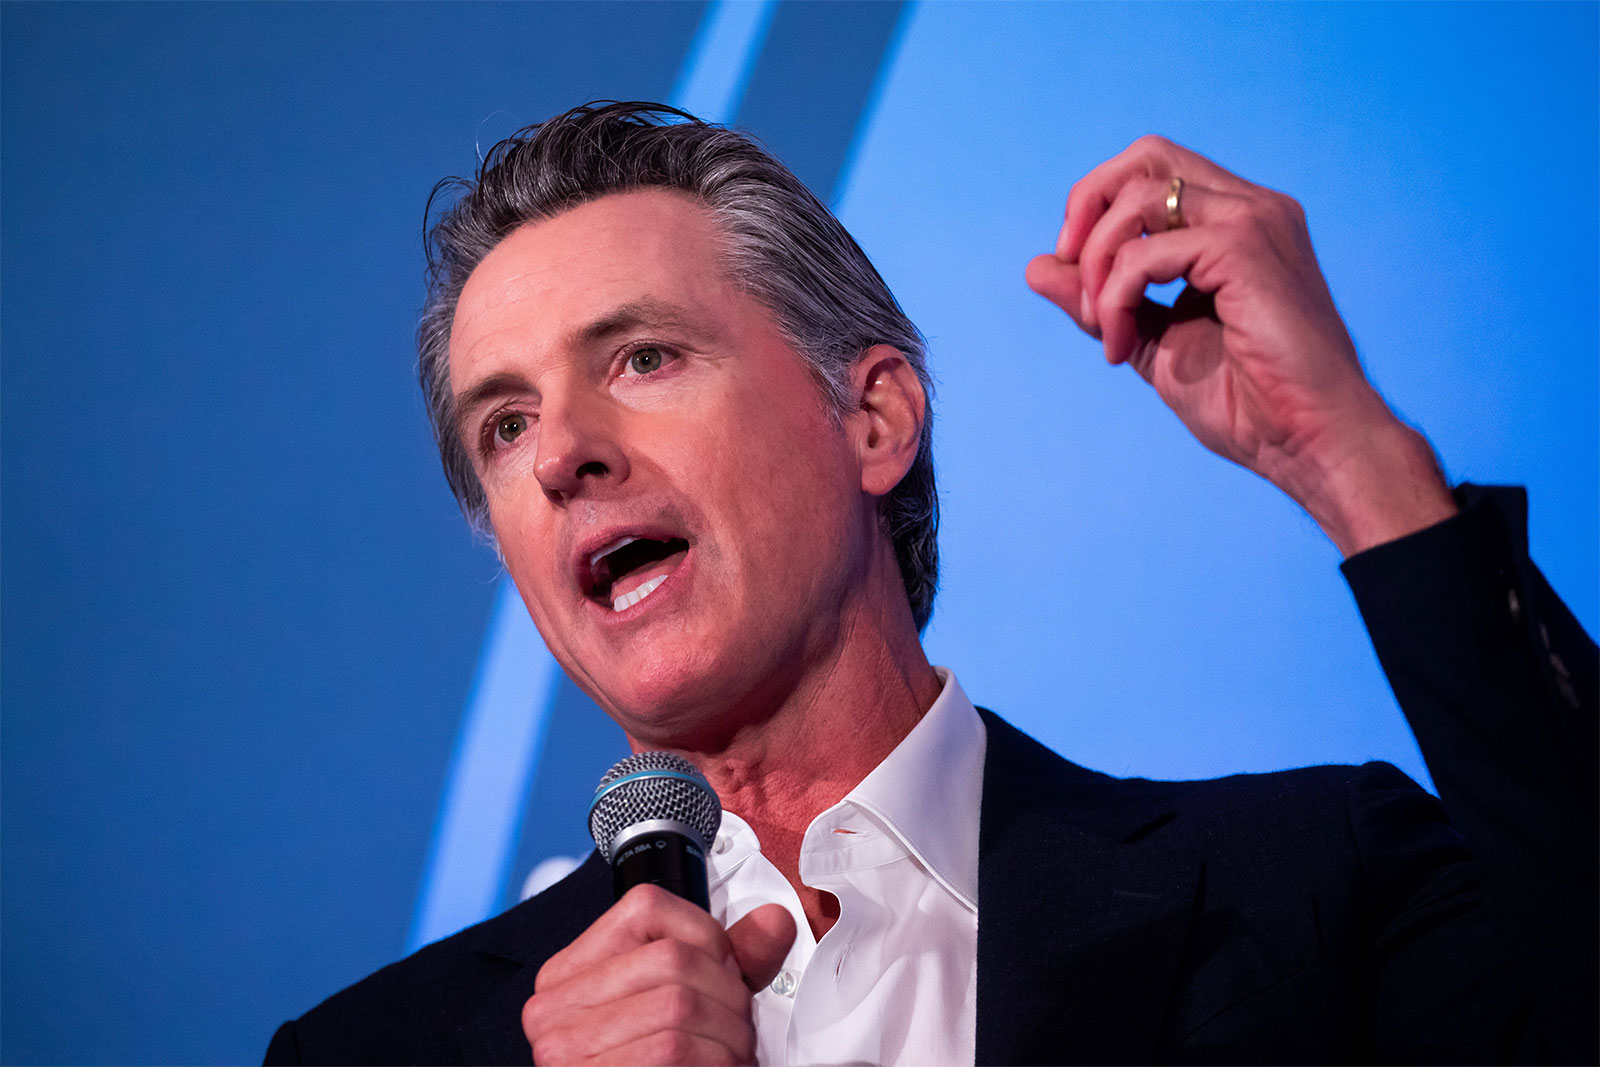 health California Gov. Gavin Newsom speaks into a microphone held in his suitable hand and gestures with his left hand.